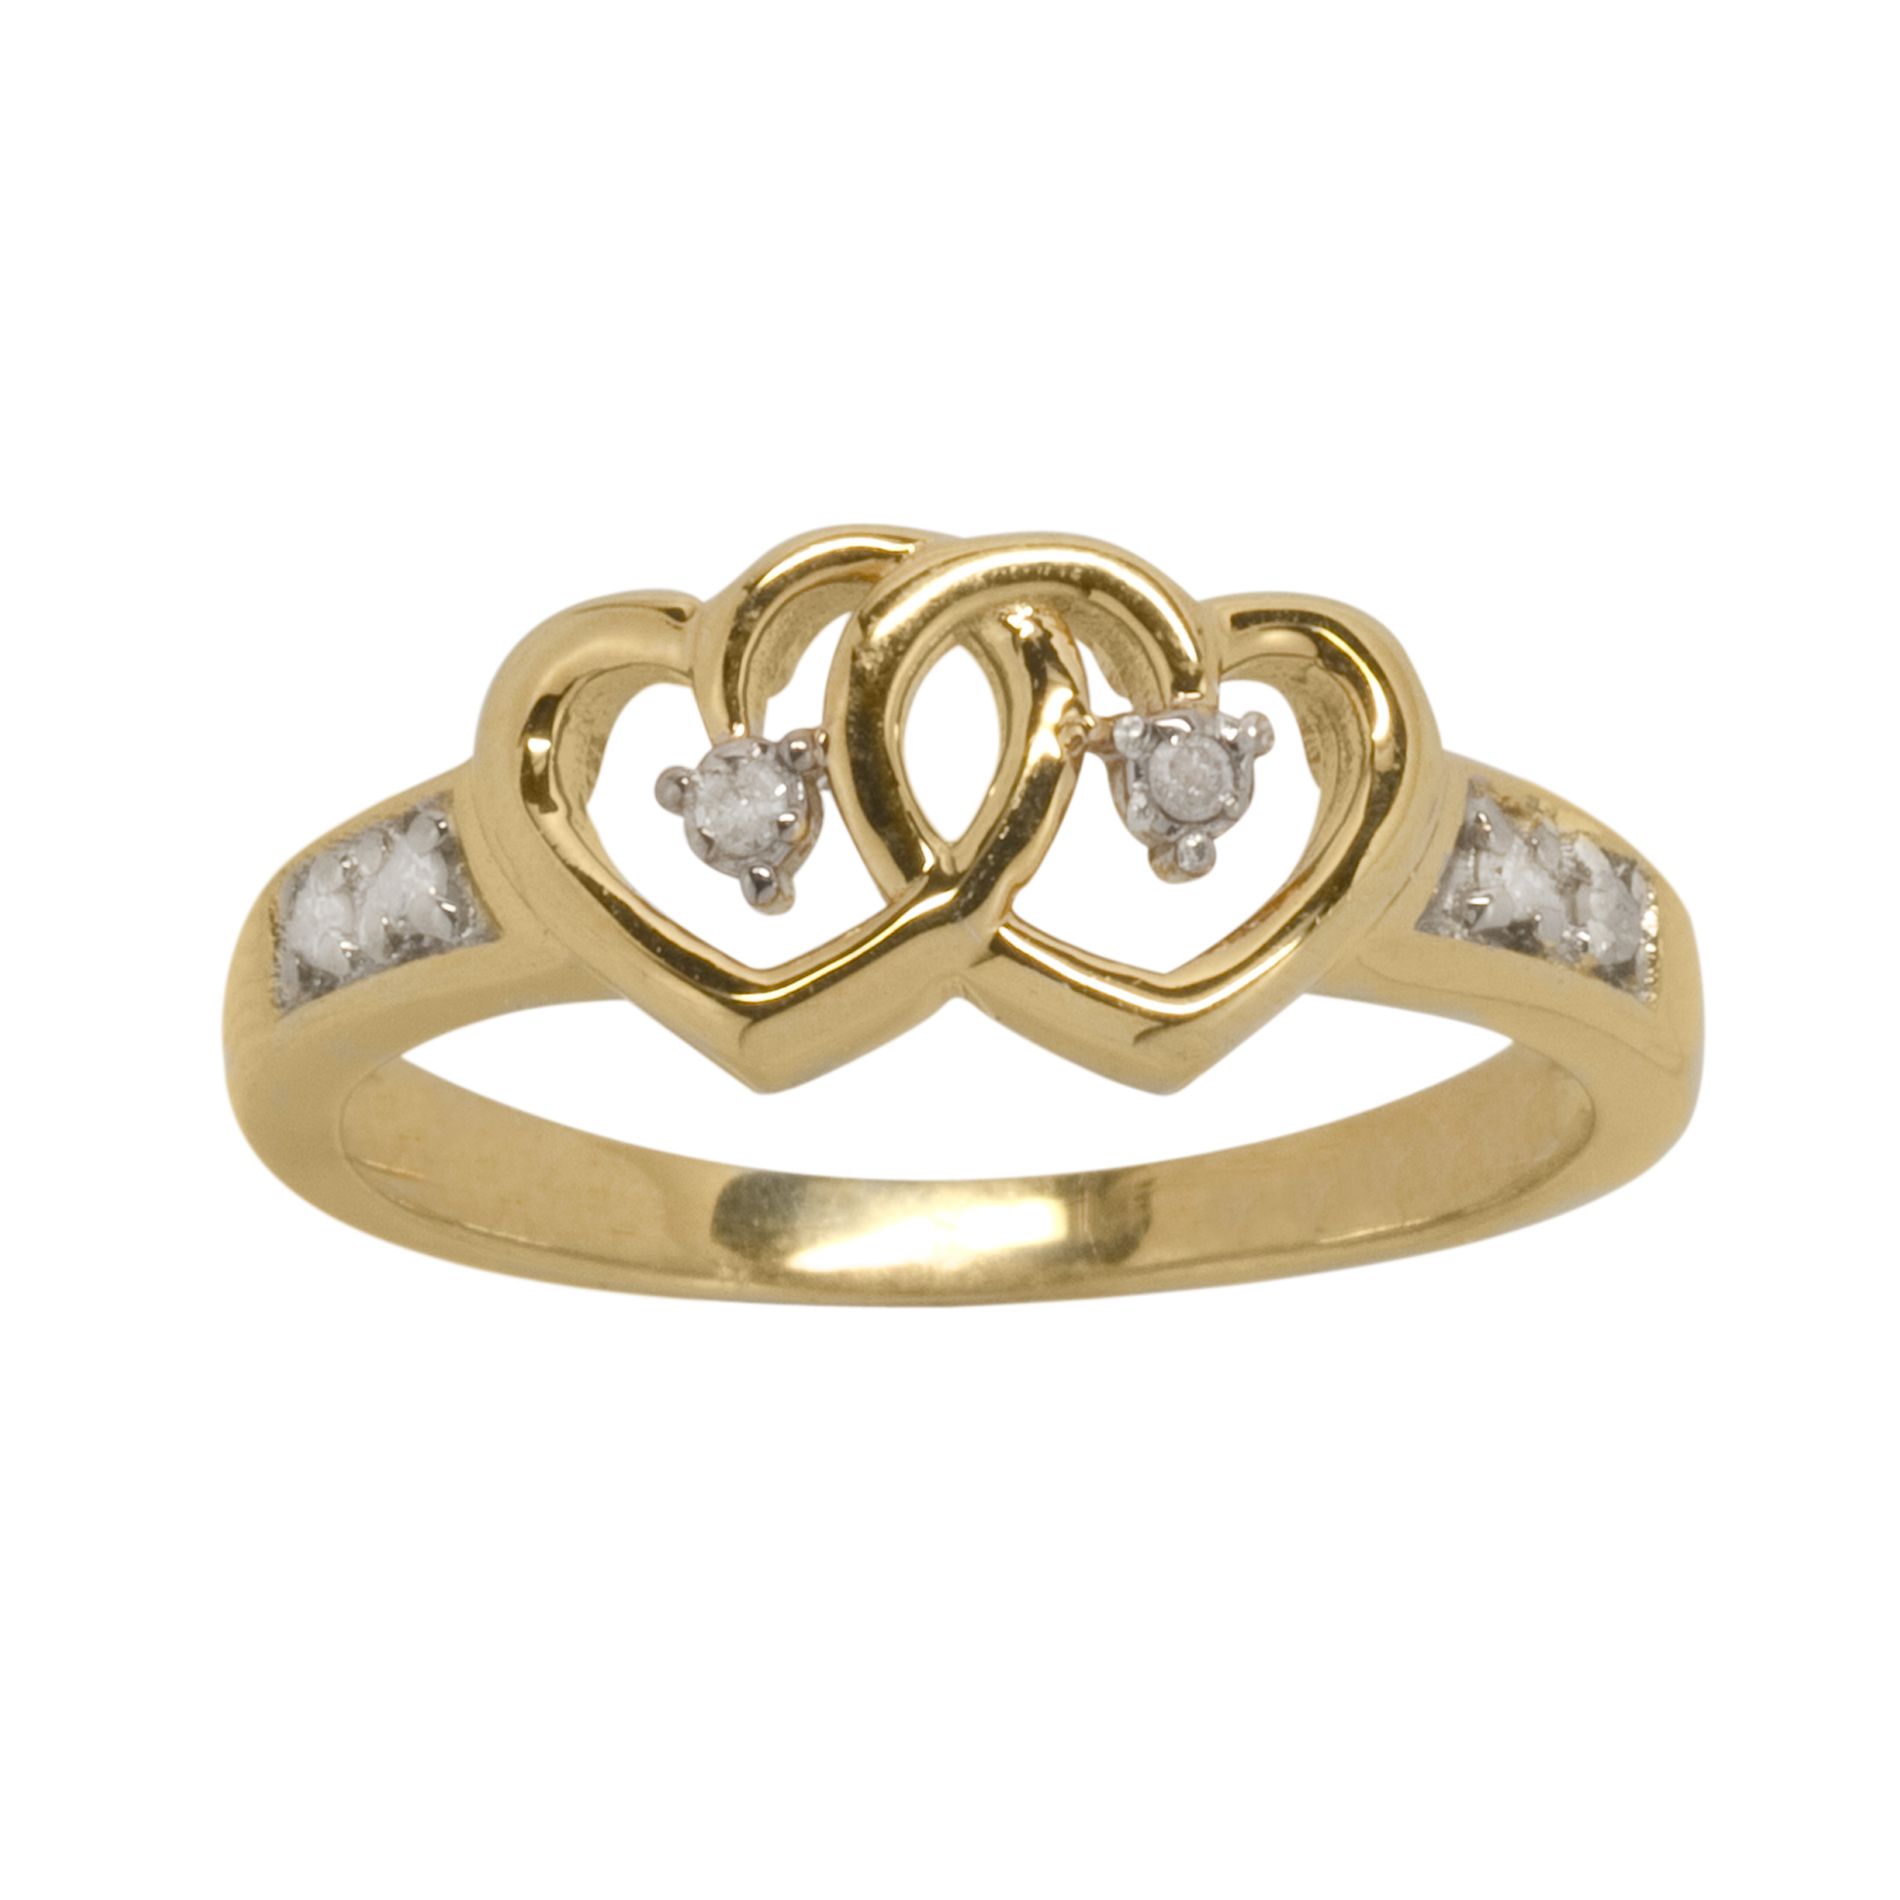 Diamond Accent Heart Ring in 14k Gold over Sterling silver